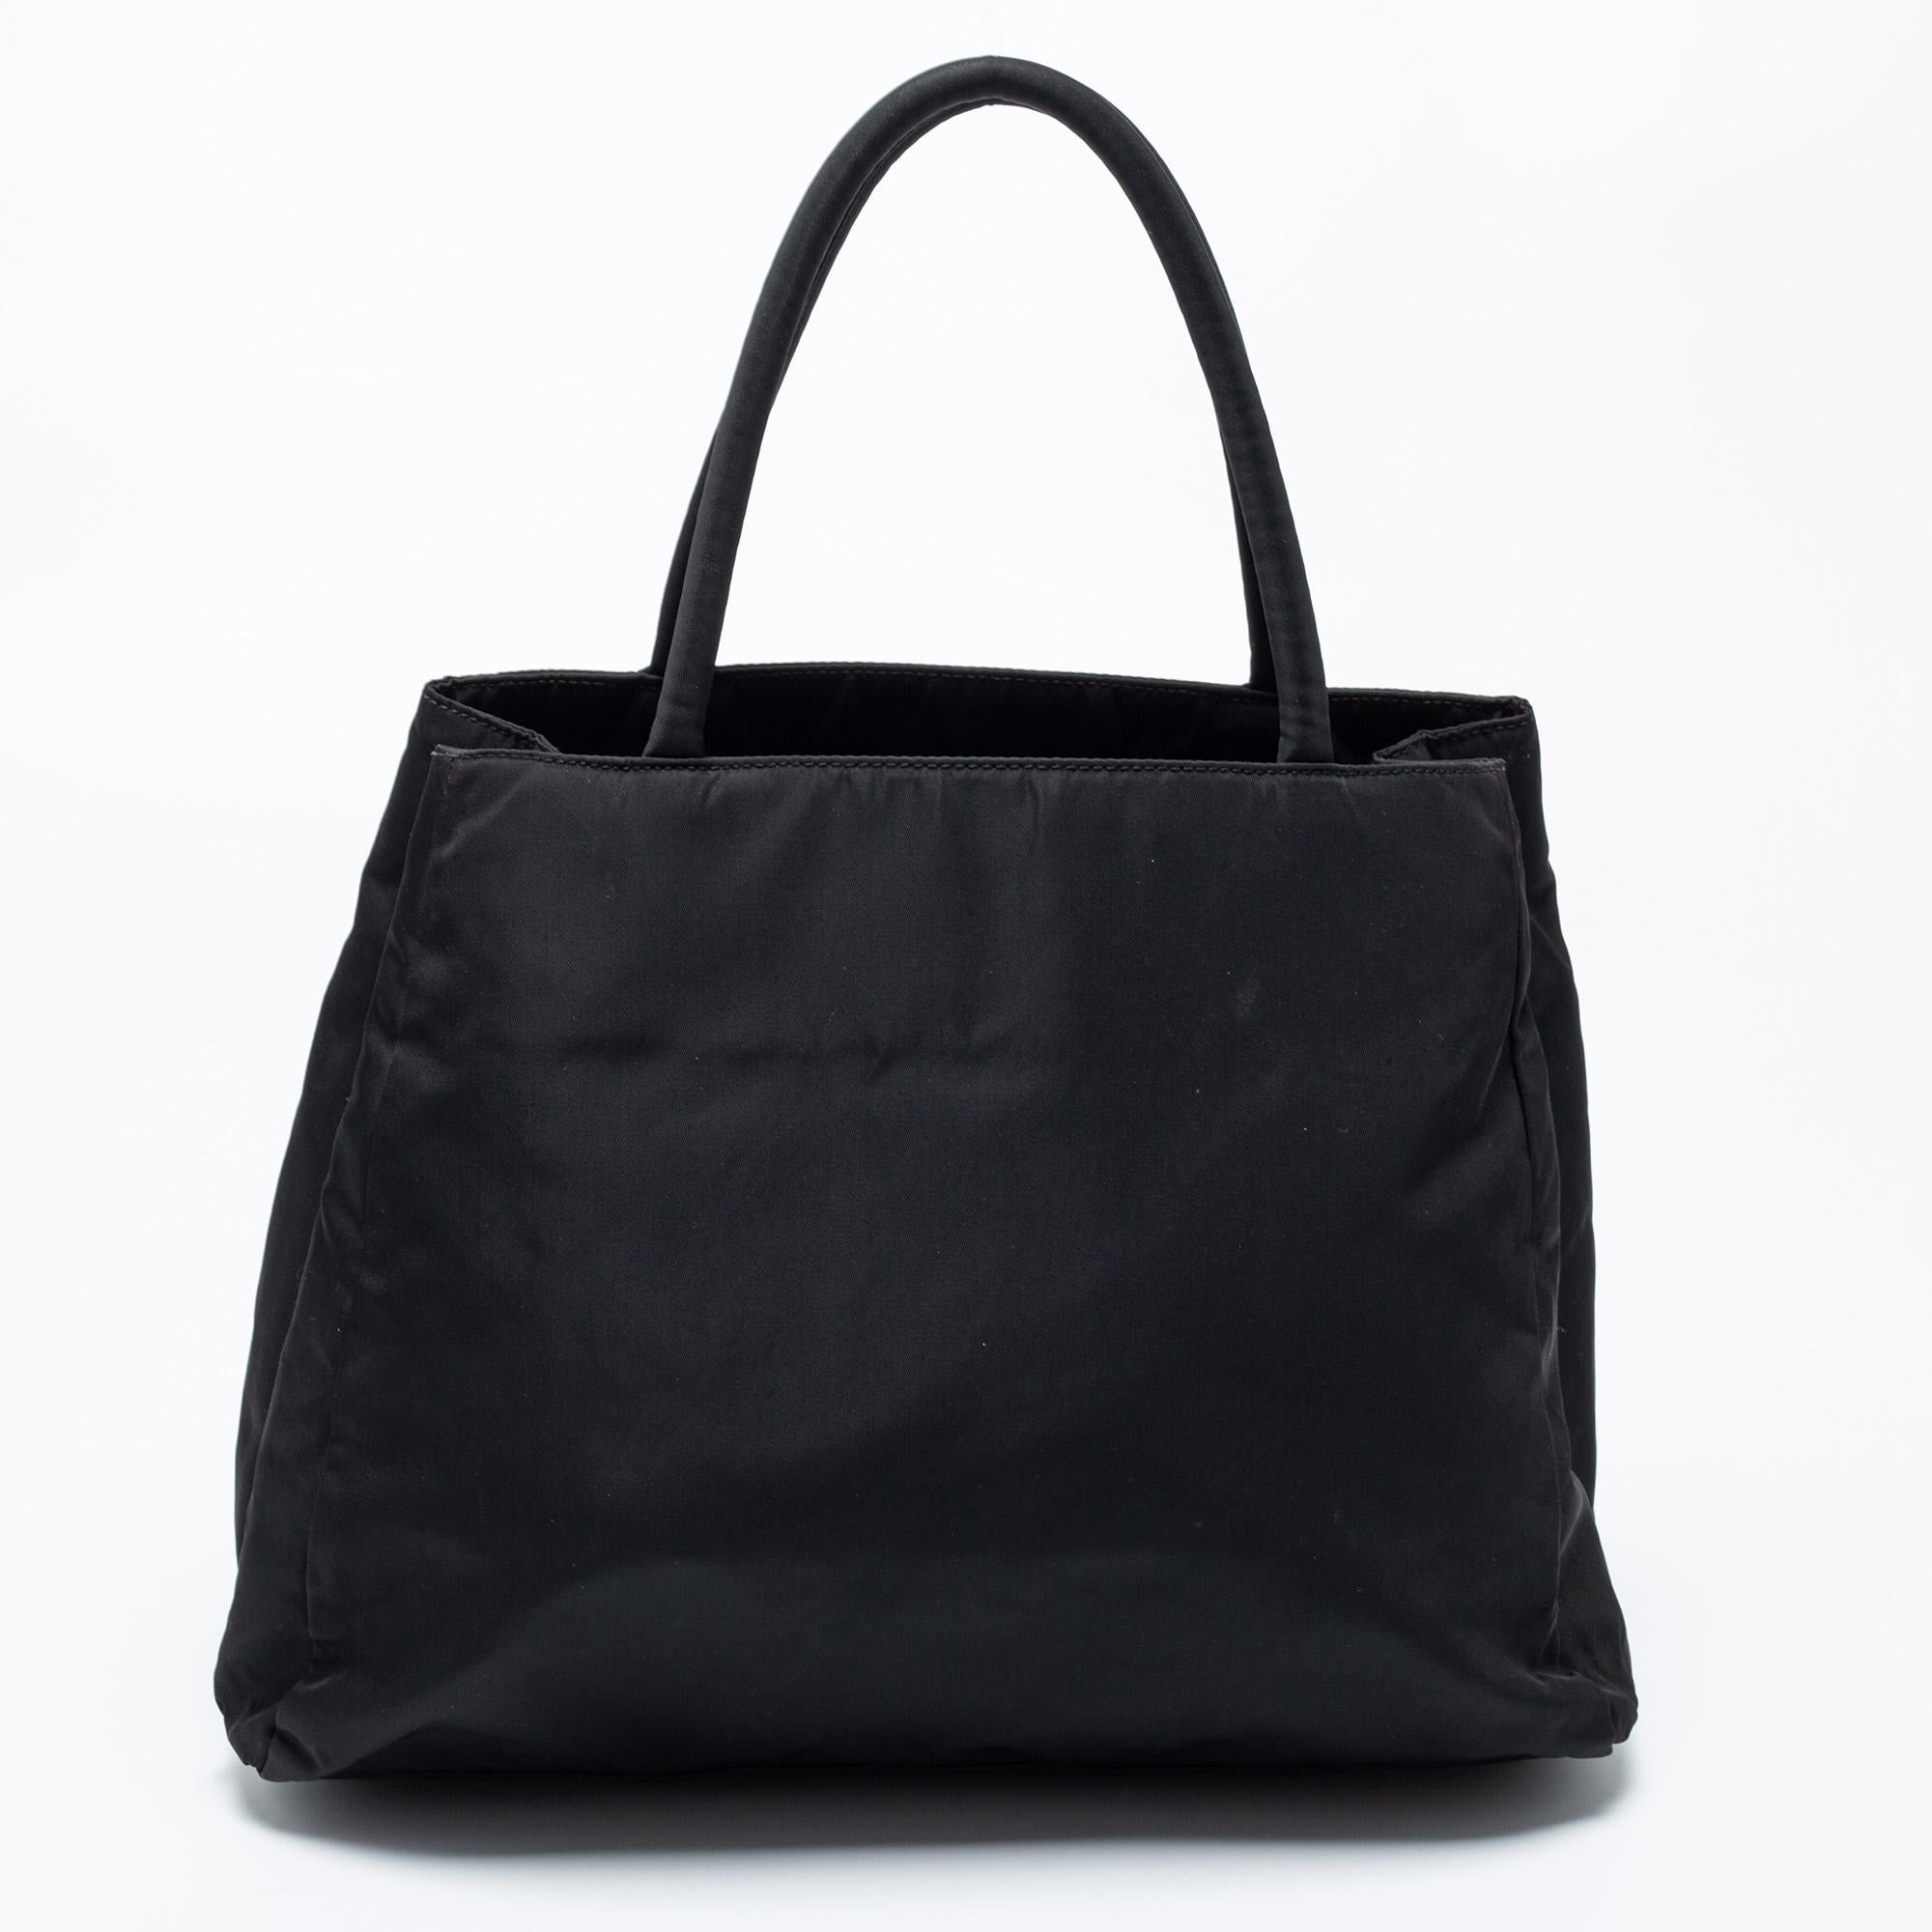 This Prada tote strikes the right balance between fashion and function. Crafted from nylon, it flaunts a brand signature on the front, dual handles at the top, and a fabric-lined interior.

